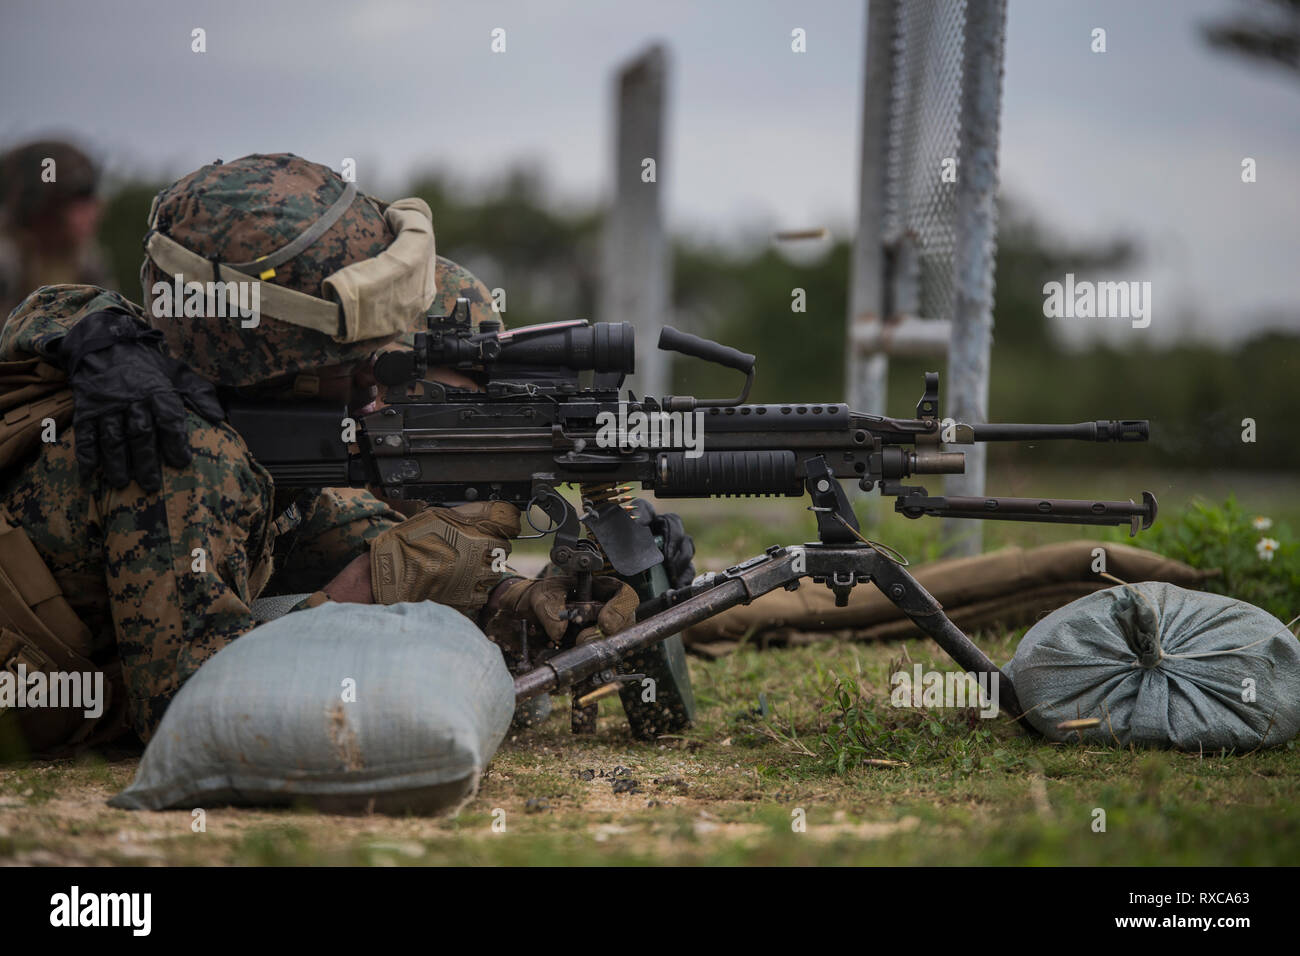 A Marine with Combat Logistics Battalion 31 fires an M249 Squad Automatic Weapon during machine gun and heavy-weapons training at Camp Hansen, Okinawa, Japan, March 7, 2019. During the training, the CLB-31 Marines learned the fundamentals to act as safety officers for upcoming unit-wide training.  CLB-31 is the Logistics Combat Element for the 31st Marine Expeditionary Unit. The 31st MEU, the Marine Corps’ only continuously forward-deployed MEU, provides a flexible and lethal force ready to perform a wide range of military operations as the premier crisis response force in the Indo-Pacific Reg Stock Photo